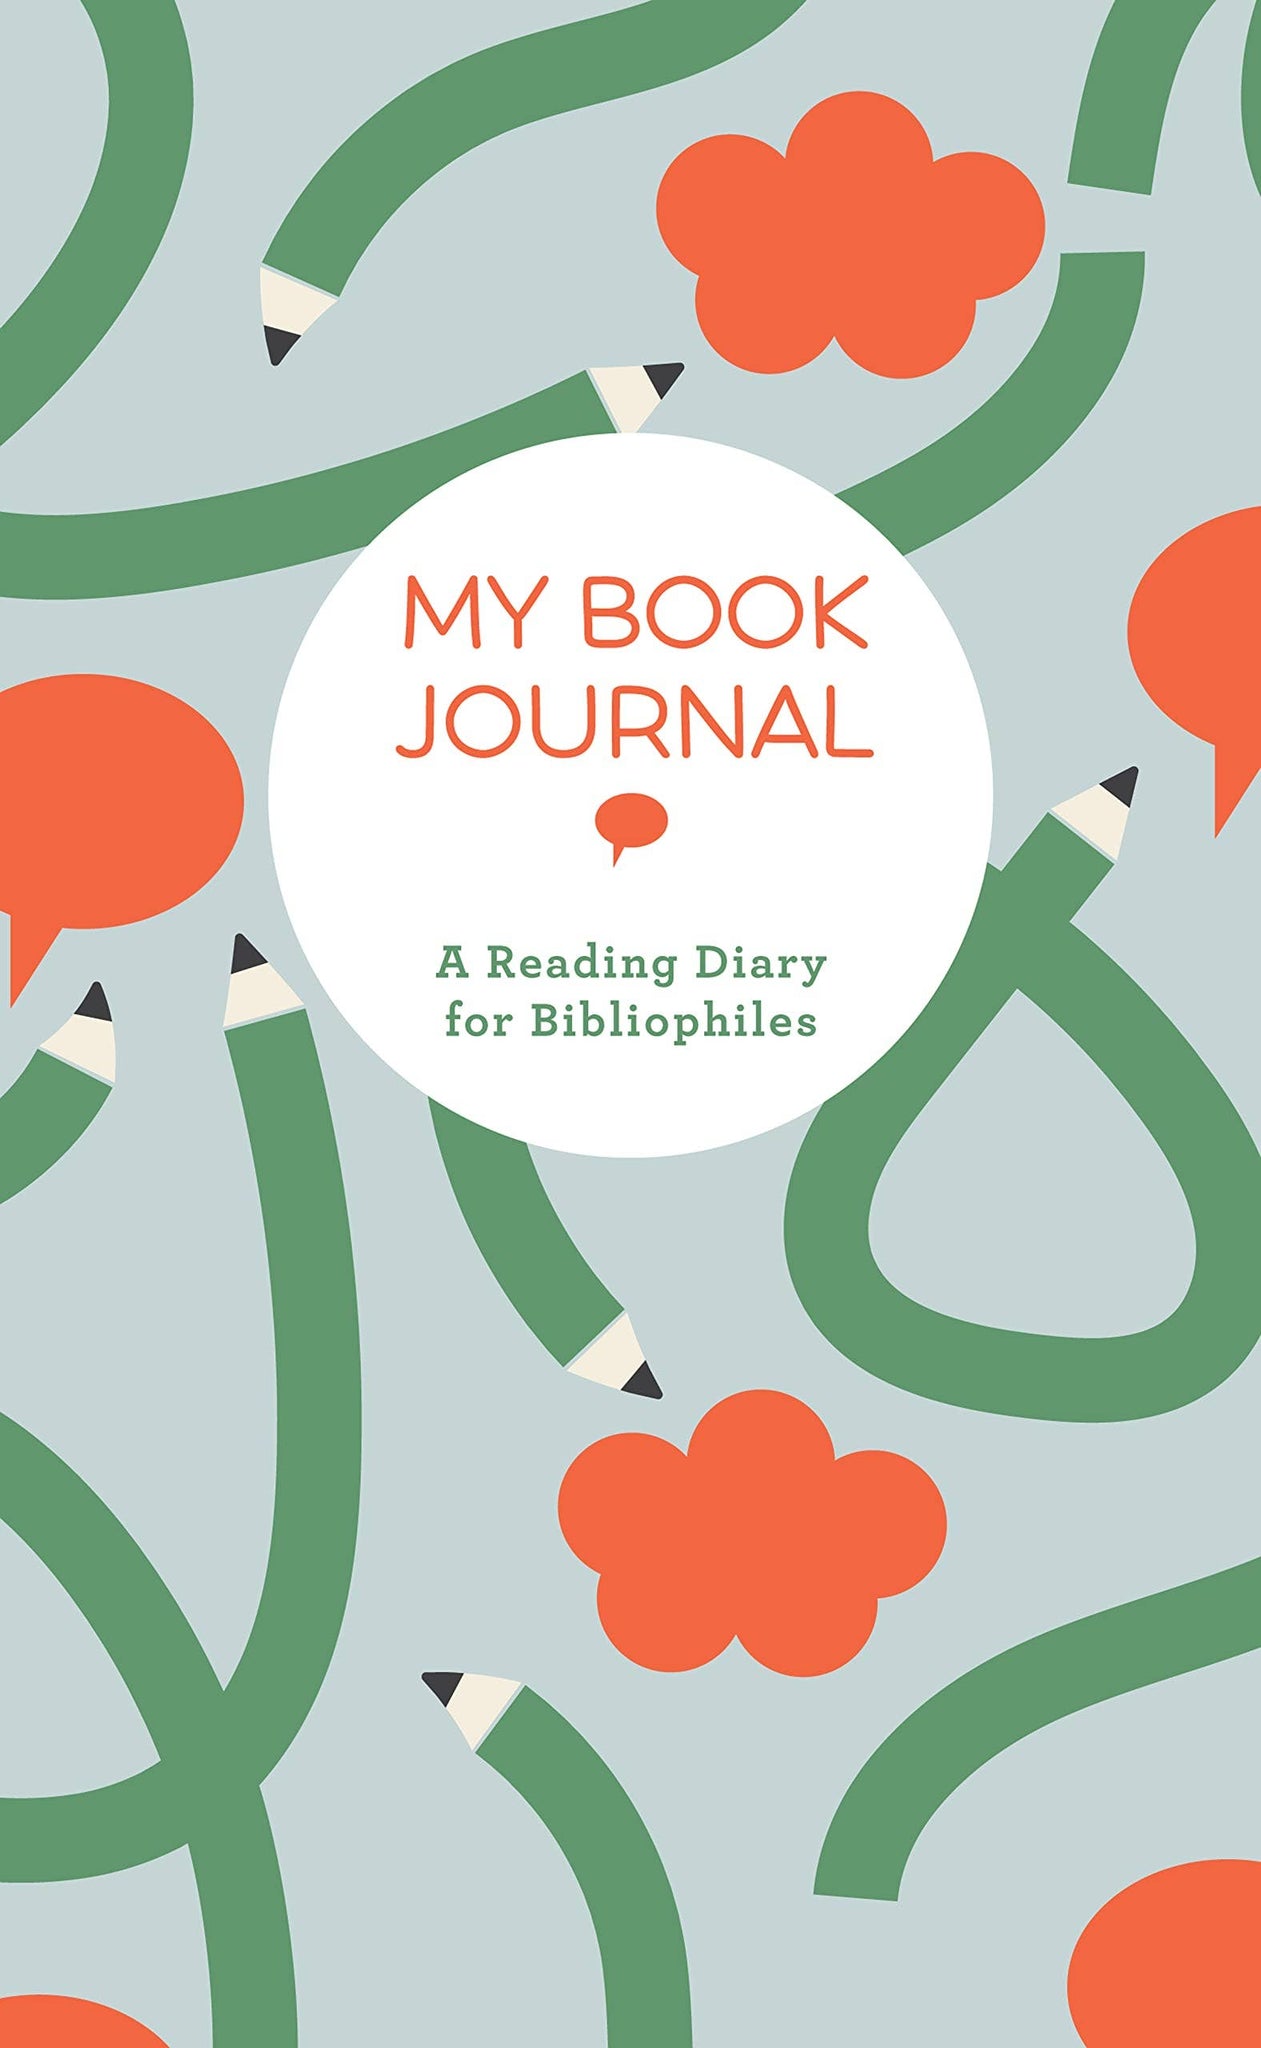 Journal, My Book: A Reading Diary for Bibliophiles